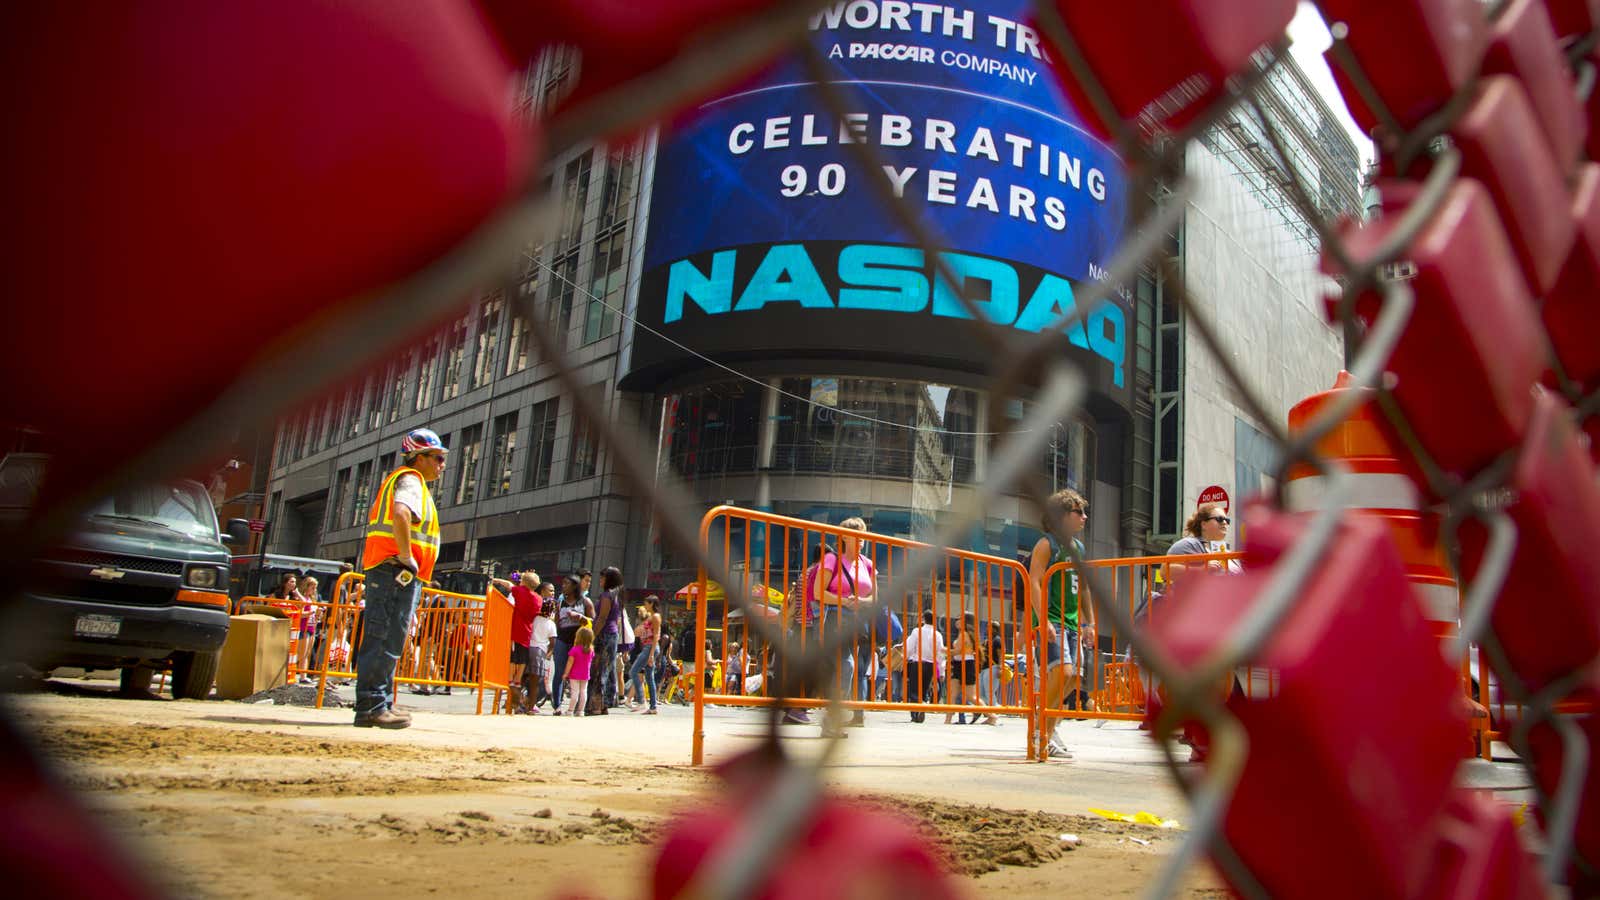 Nasdaq’s long legacy can’t save it from its recent past.